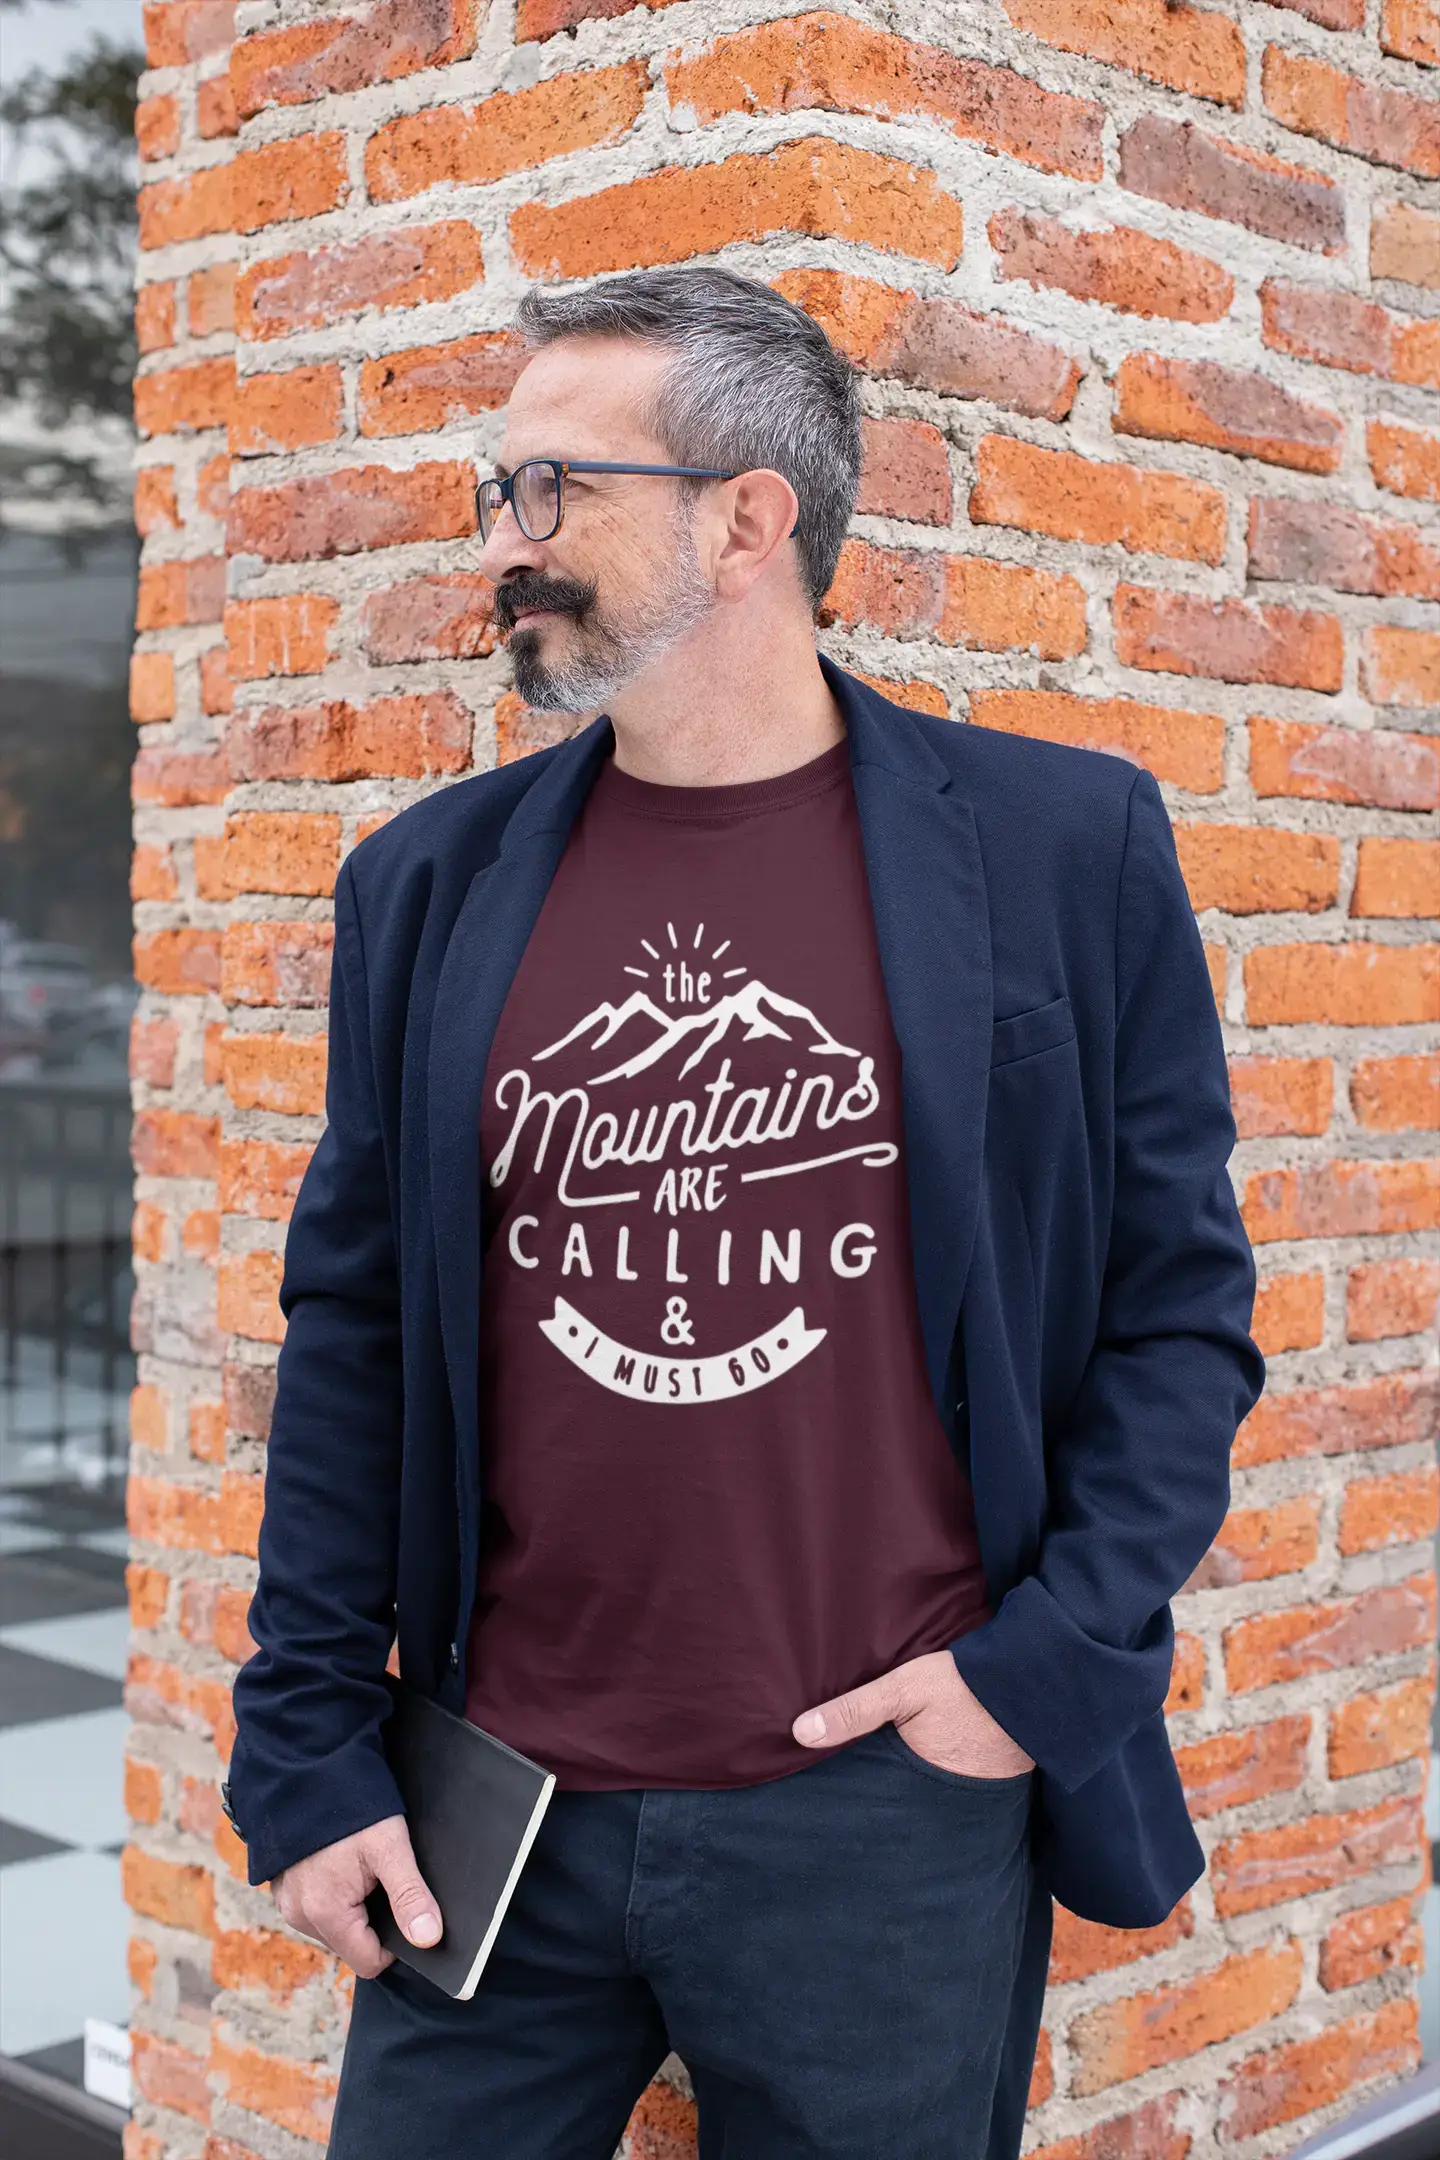 ULTRABASIC - Graphic Printed Men's The Mountains Are Calling And I Must Go Hiking Tee Bottle Green